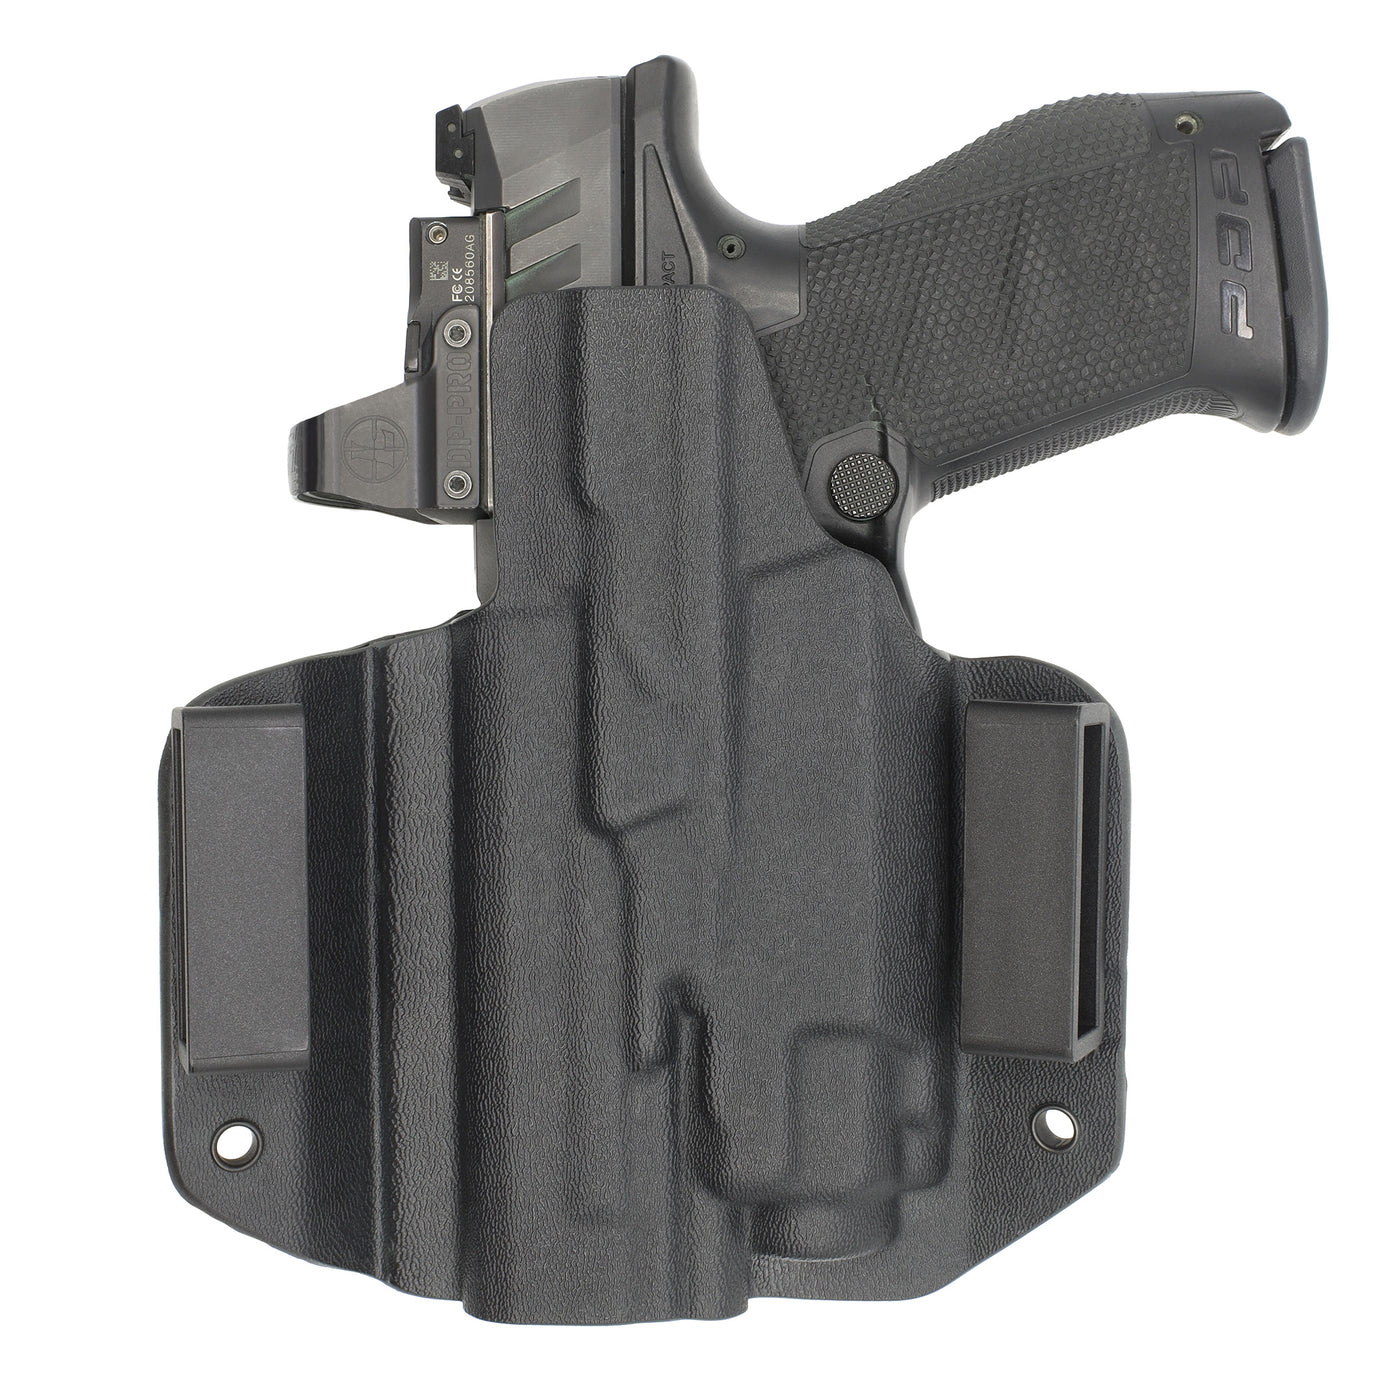 C&G Holsters custom OWB Tactical CZ P07/P09 Streamlight TLR8 holstered back view